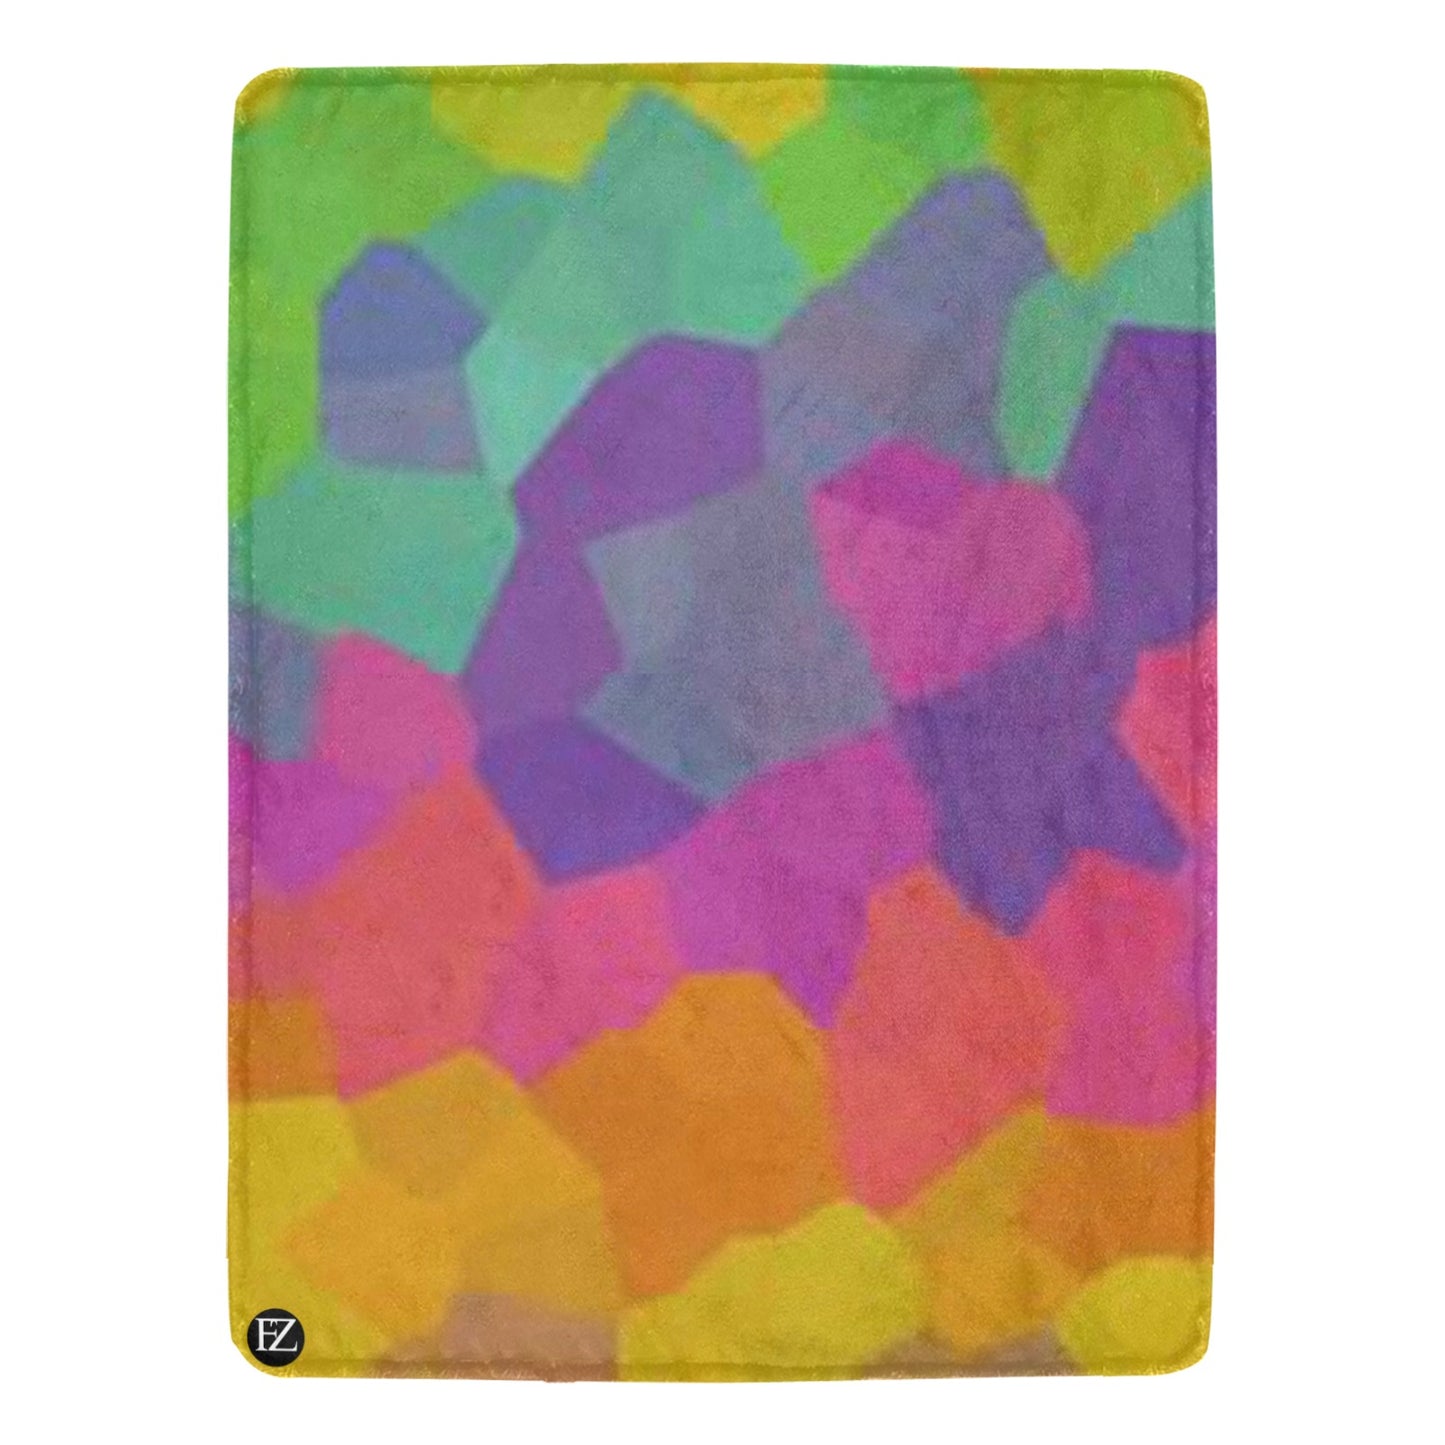 cozy thick blanket abstract ultra-soft micro fleece blanket 60"x80" (thick)